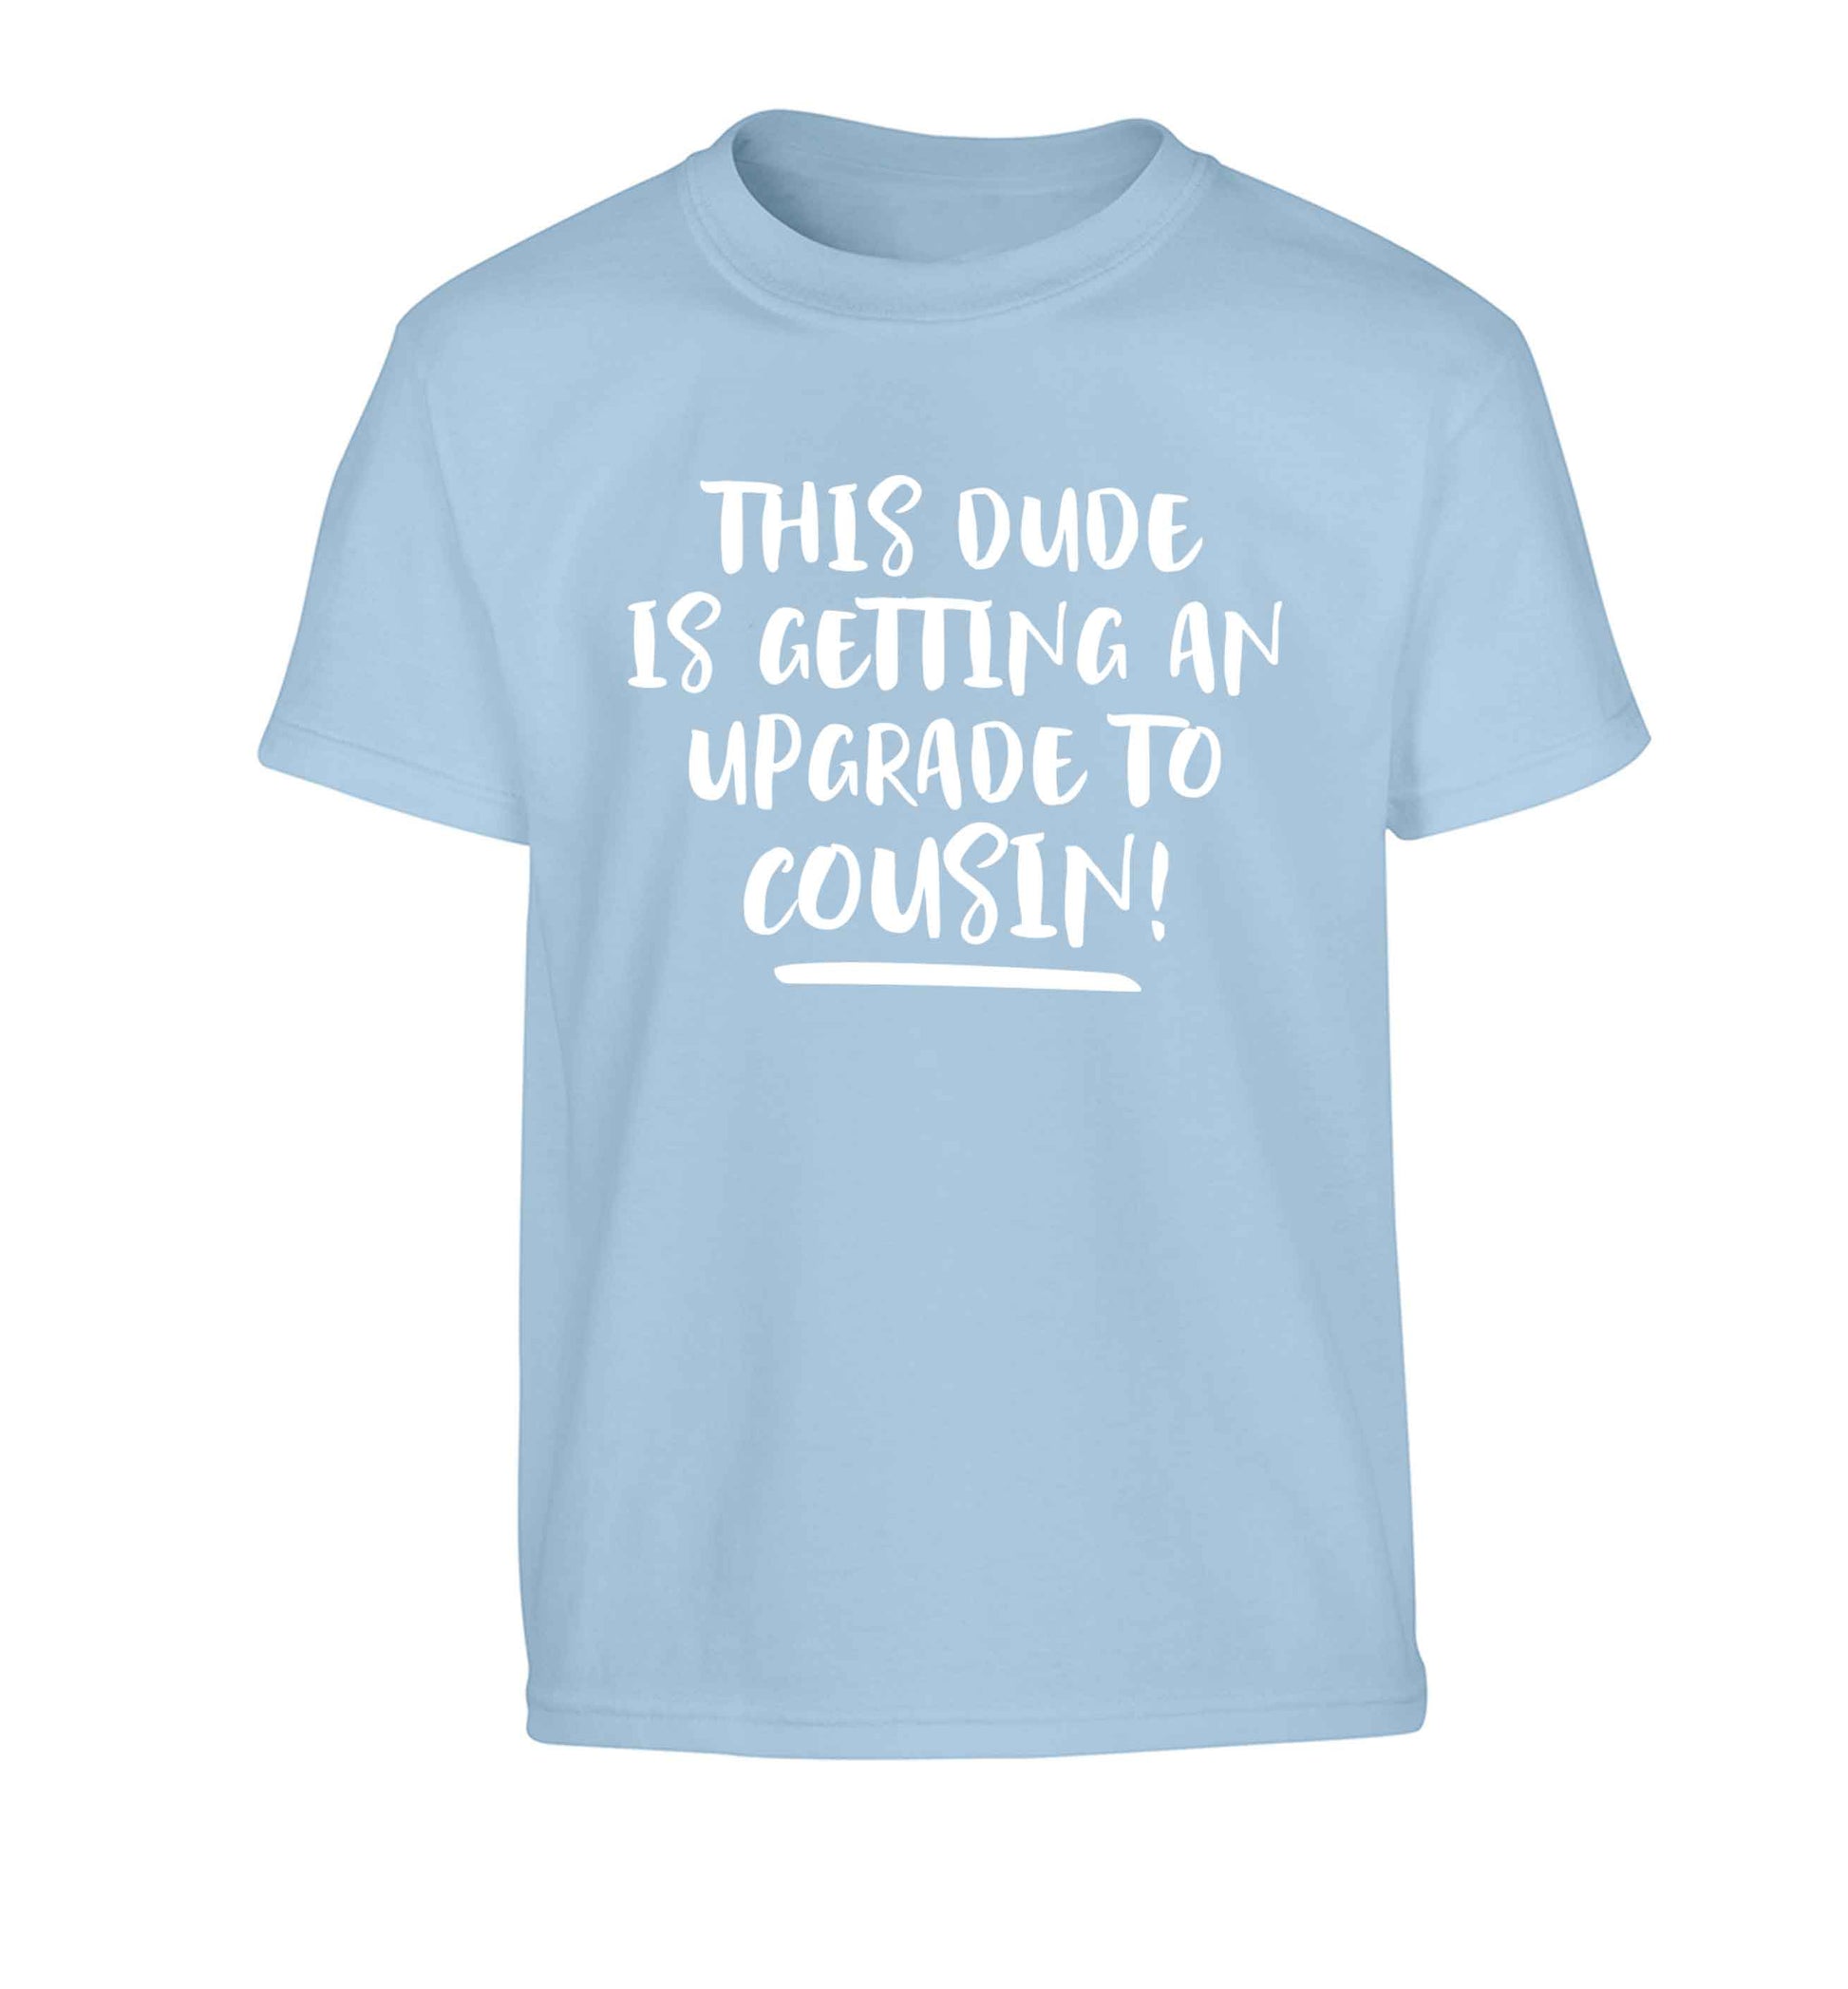 This dude is getting an upgrade to cousin! Children's light blue Tshirt 12-13 Years